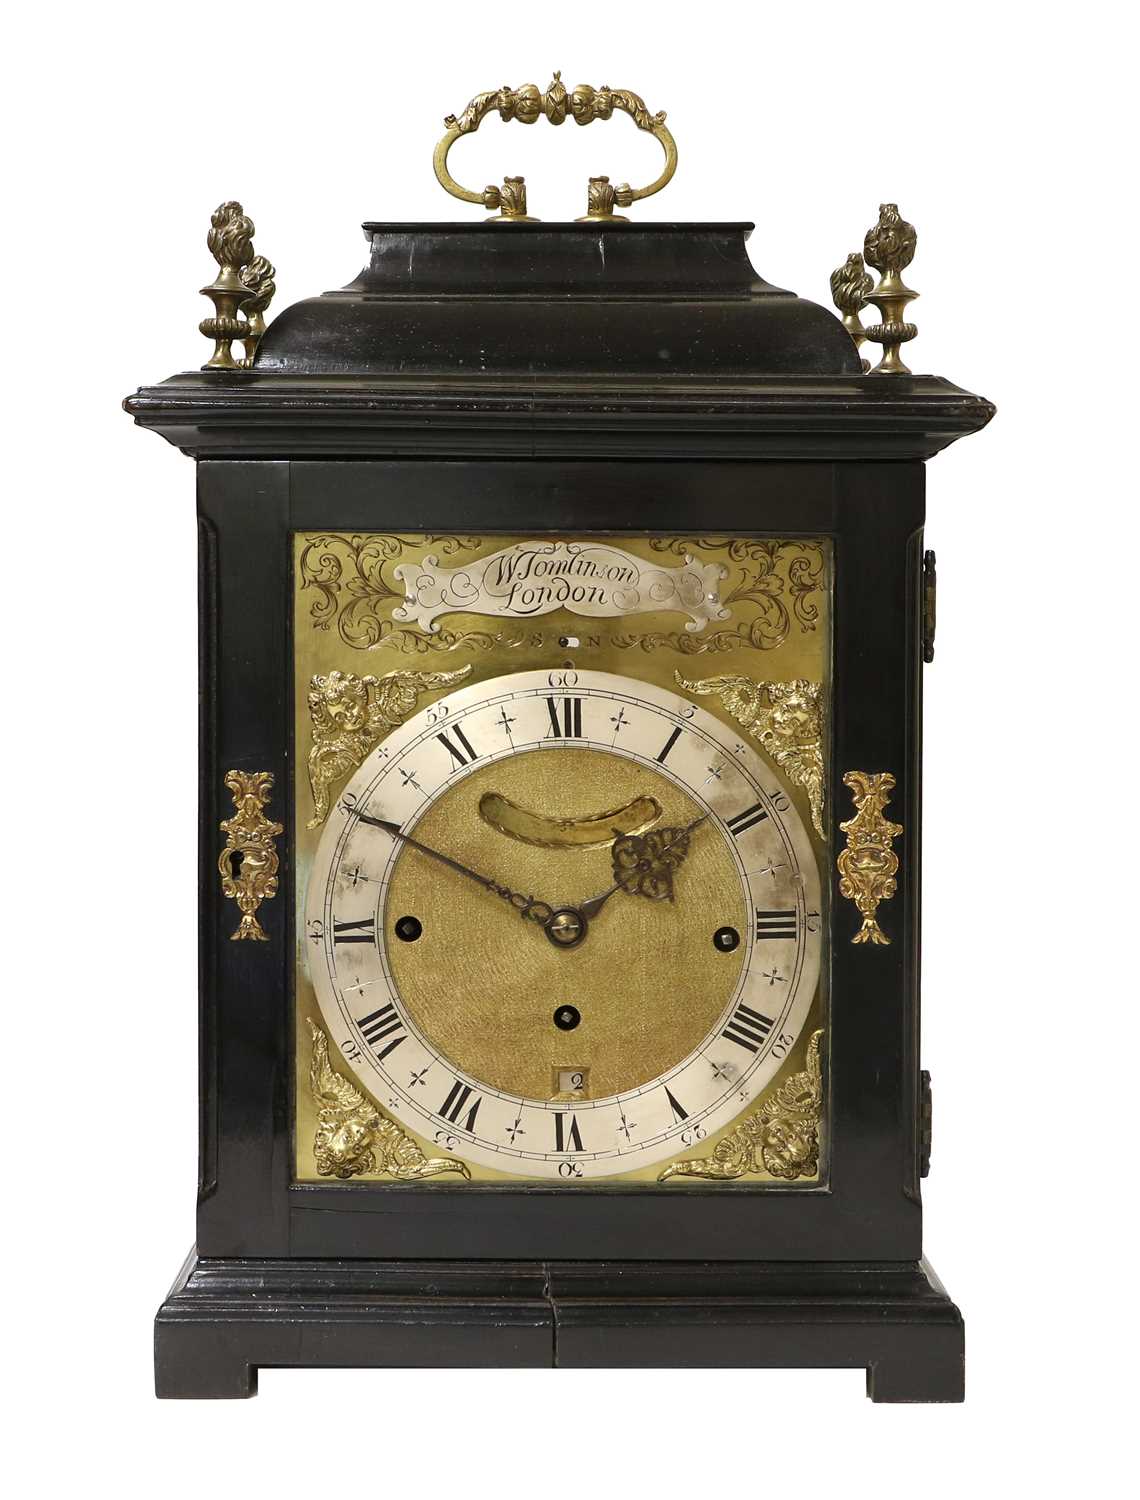 An Ebonised Chiming Table Clock, signed W Tomlinson, London, early 18th century, inverted bell top - Image 3 of 25